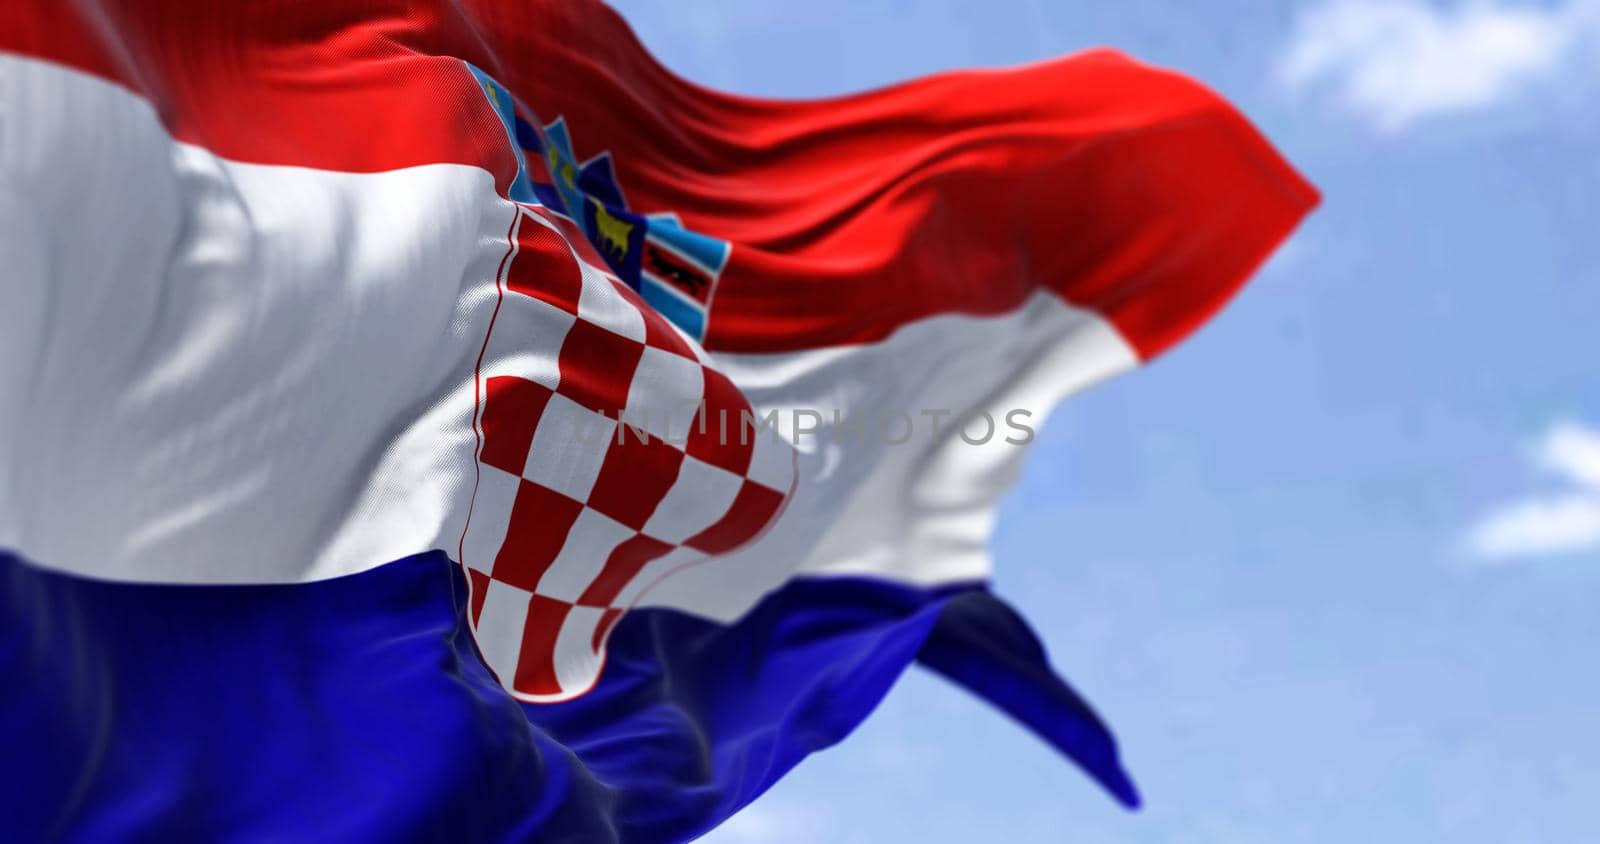 Detail of the national flag of Croatia waving in the wind on a clear day by rarrarorro